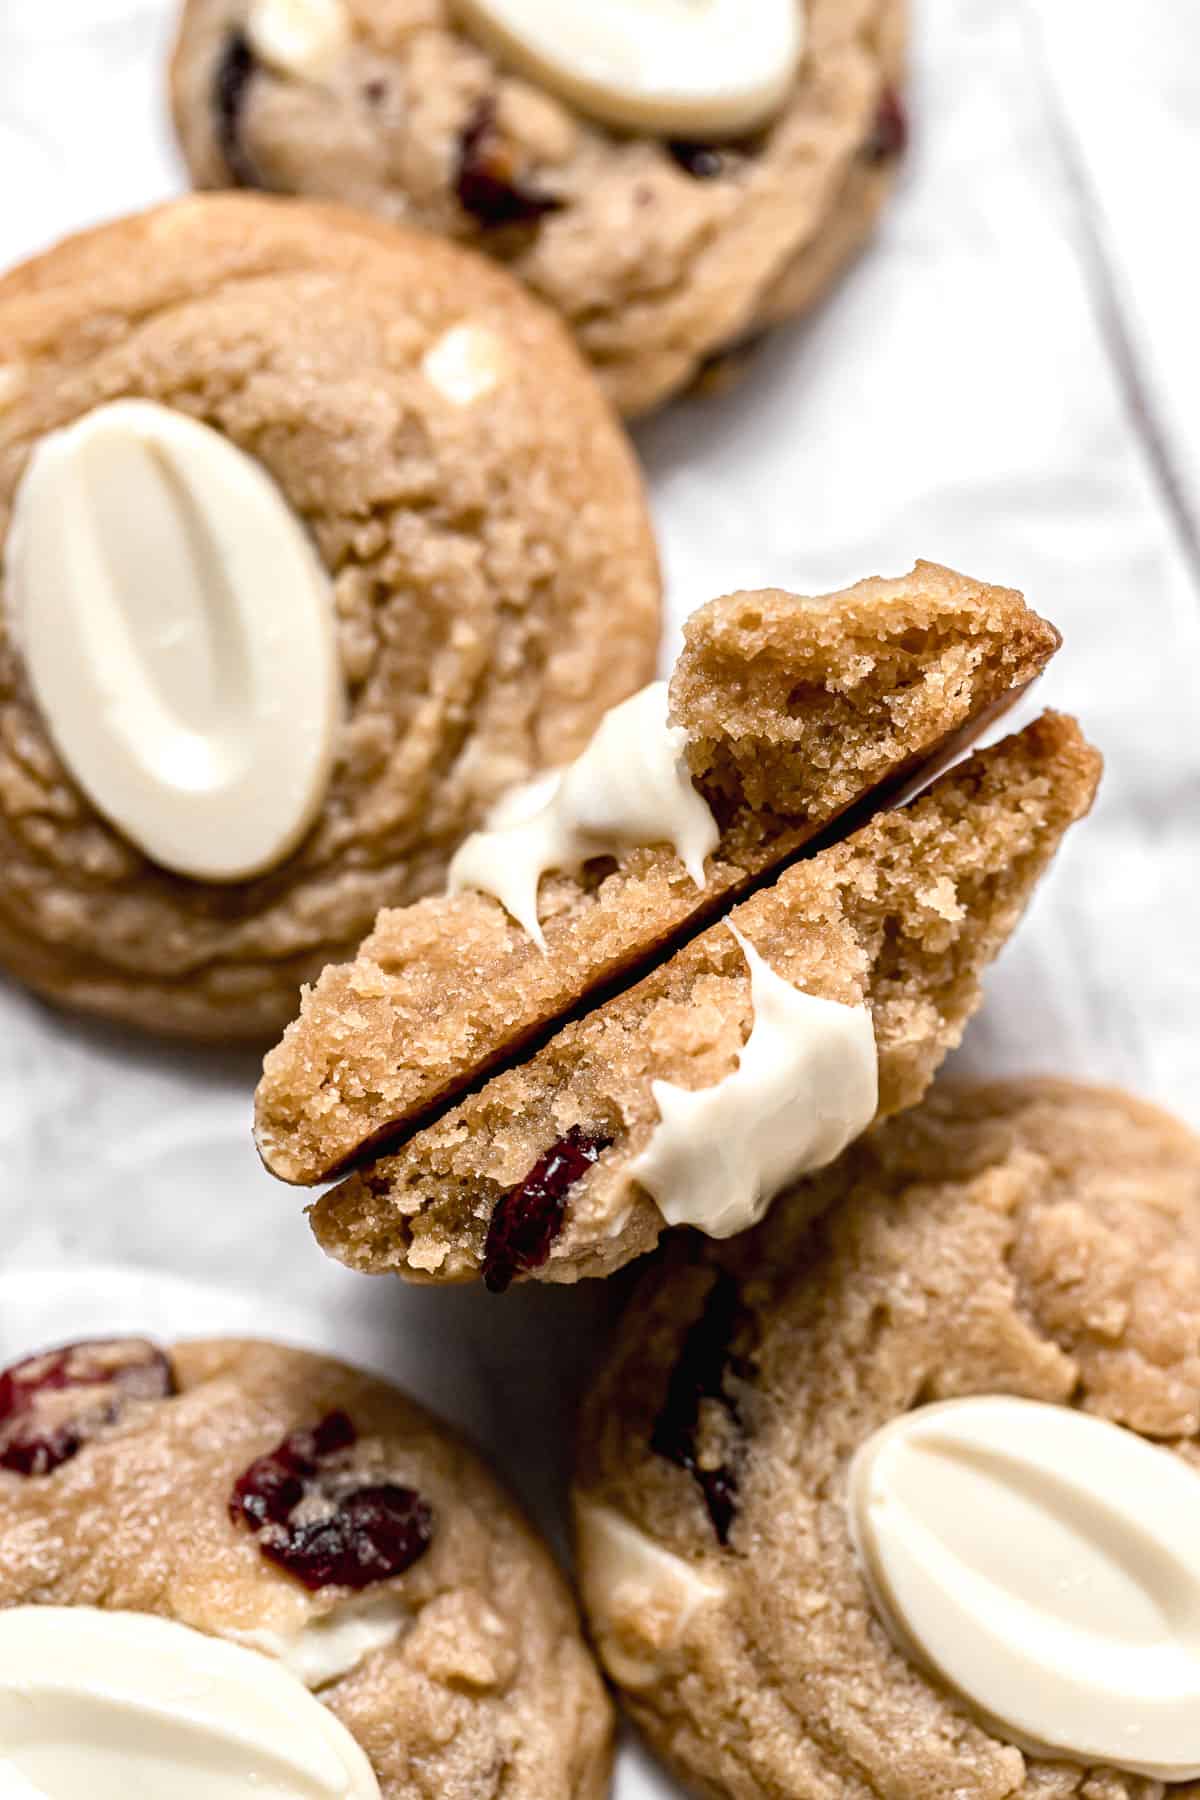 white chocolate cranberry cookie broken in half to reveal inside texture.